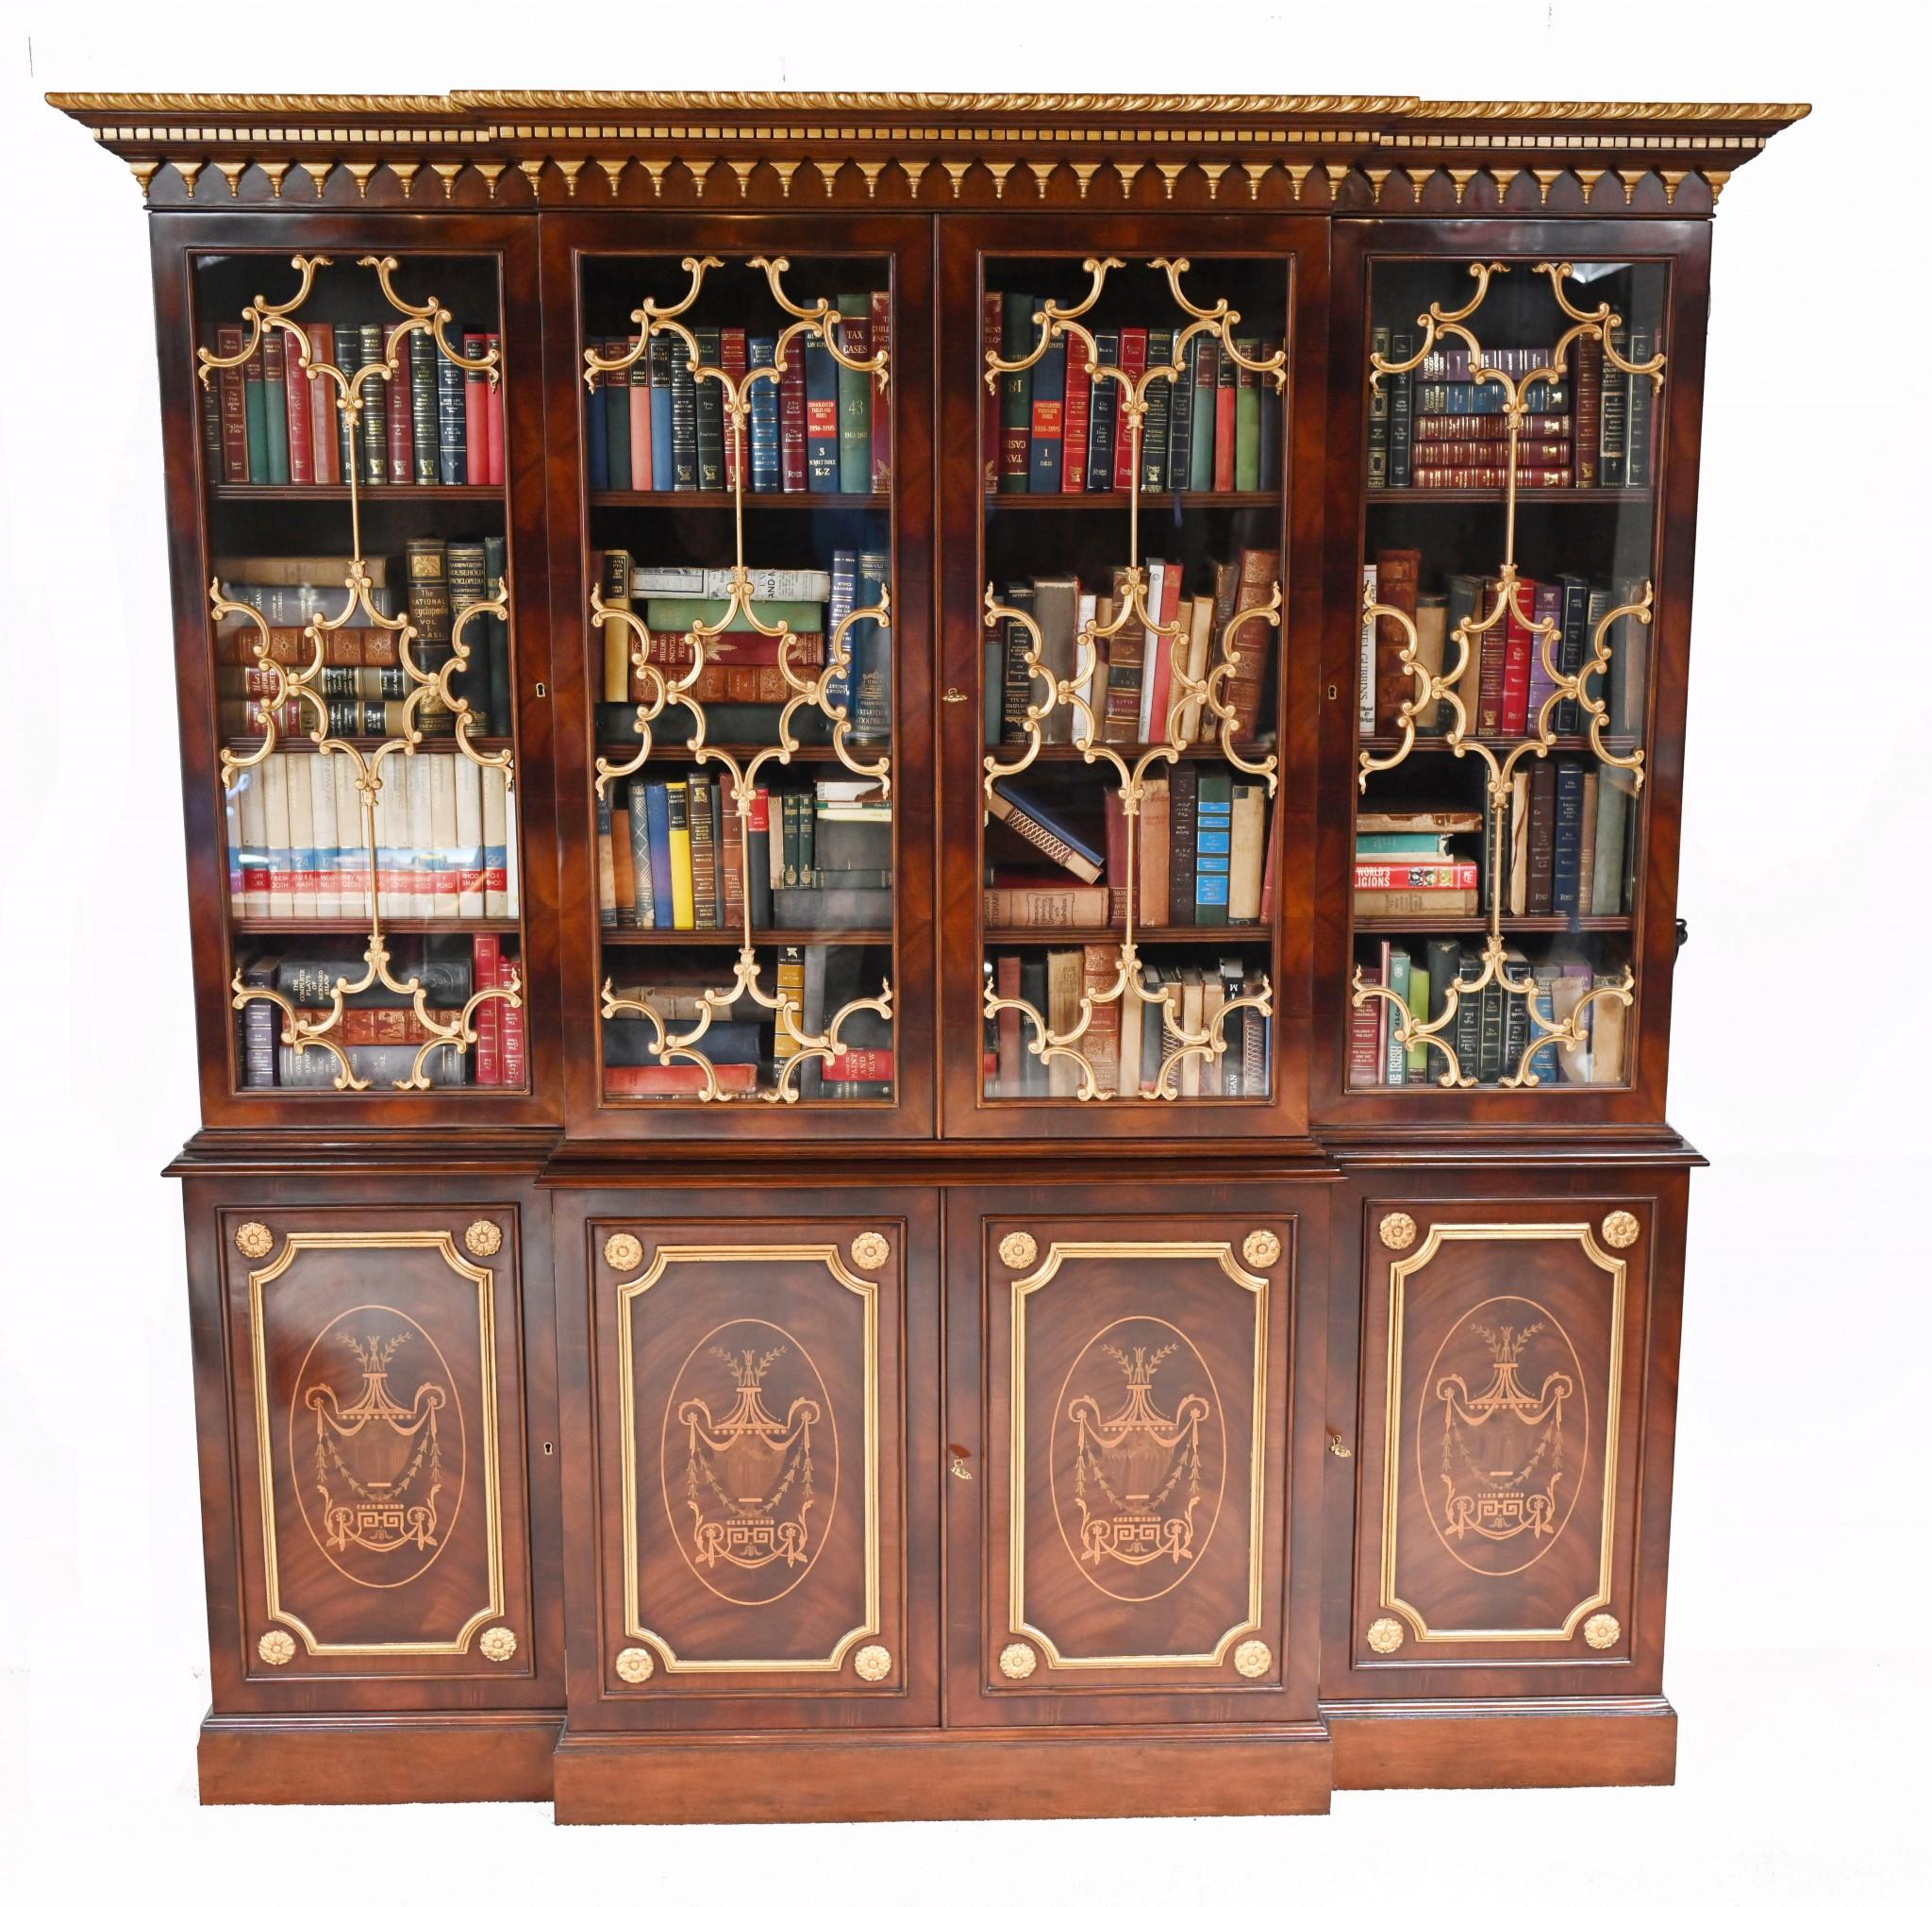 Wonderful breakfront bookcase in mahogany in the Chippendale style
Great look with the gilt sections of the astragal glazing - in the Gothic style - gilded
Top section comes apart from the bottom for ease of transport
Bottom sectin features